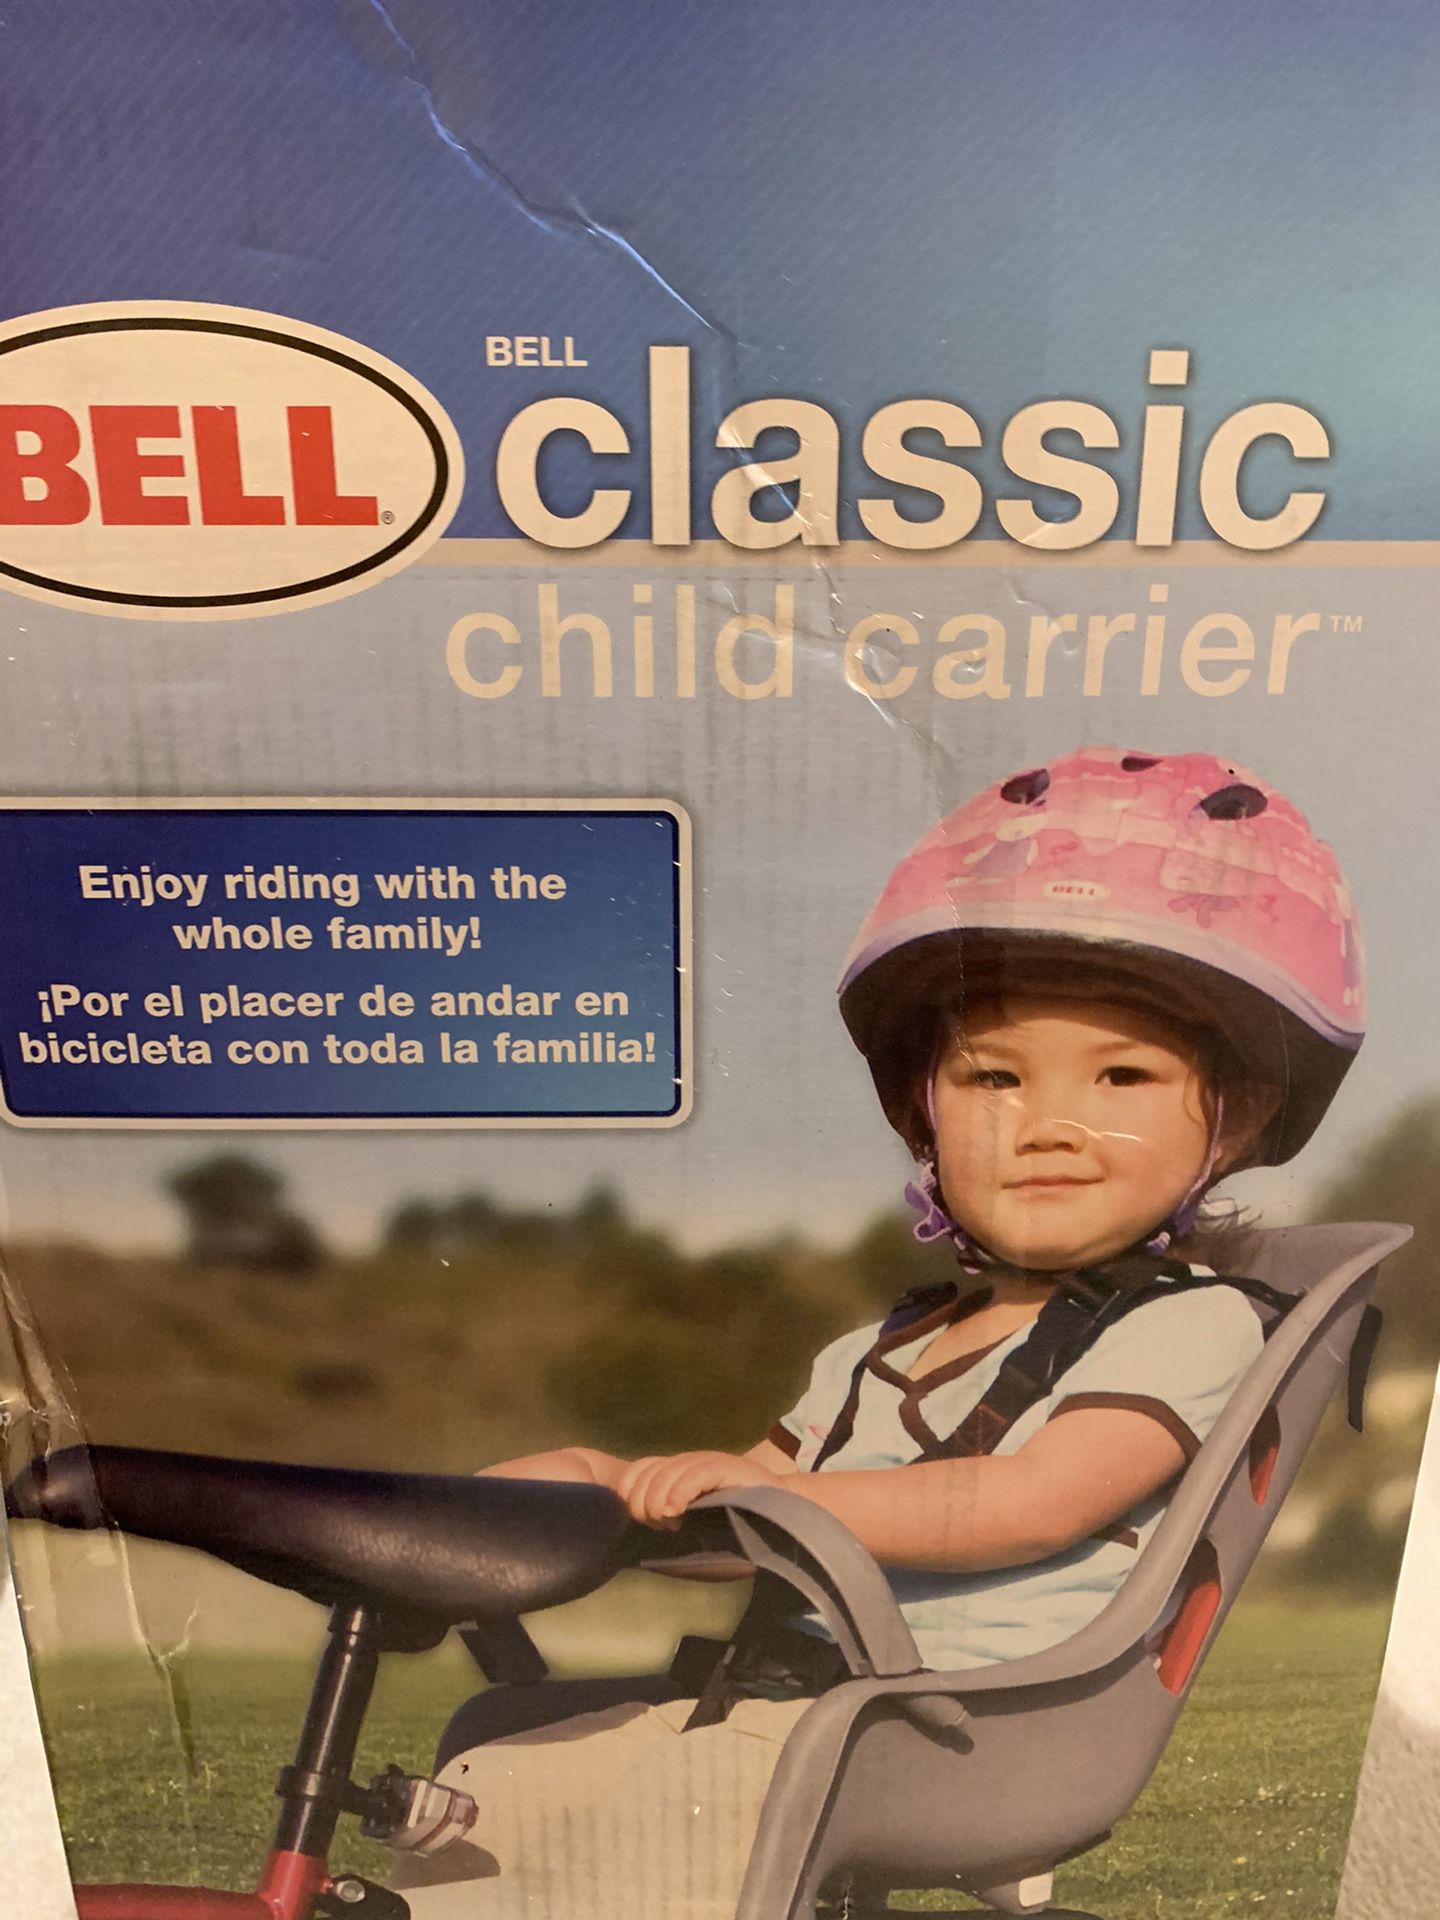 Bell Classic (Bike) Child Carrier NEW